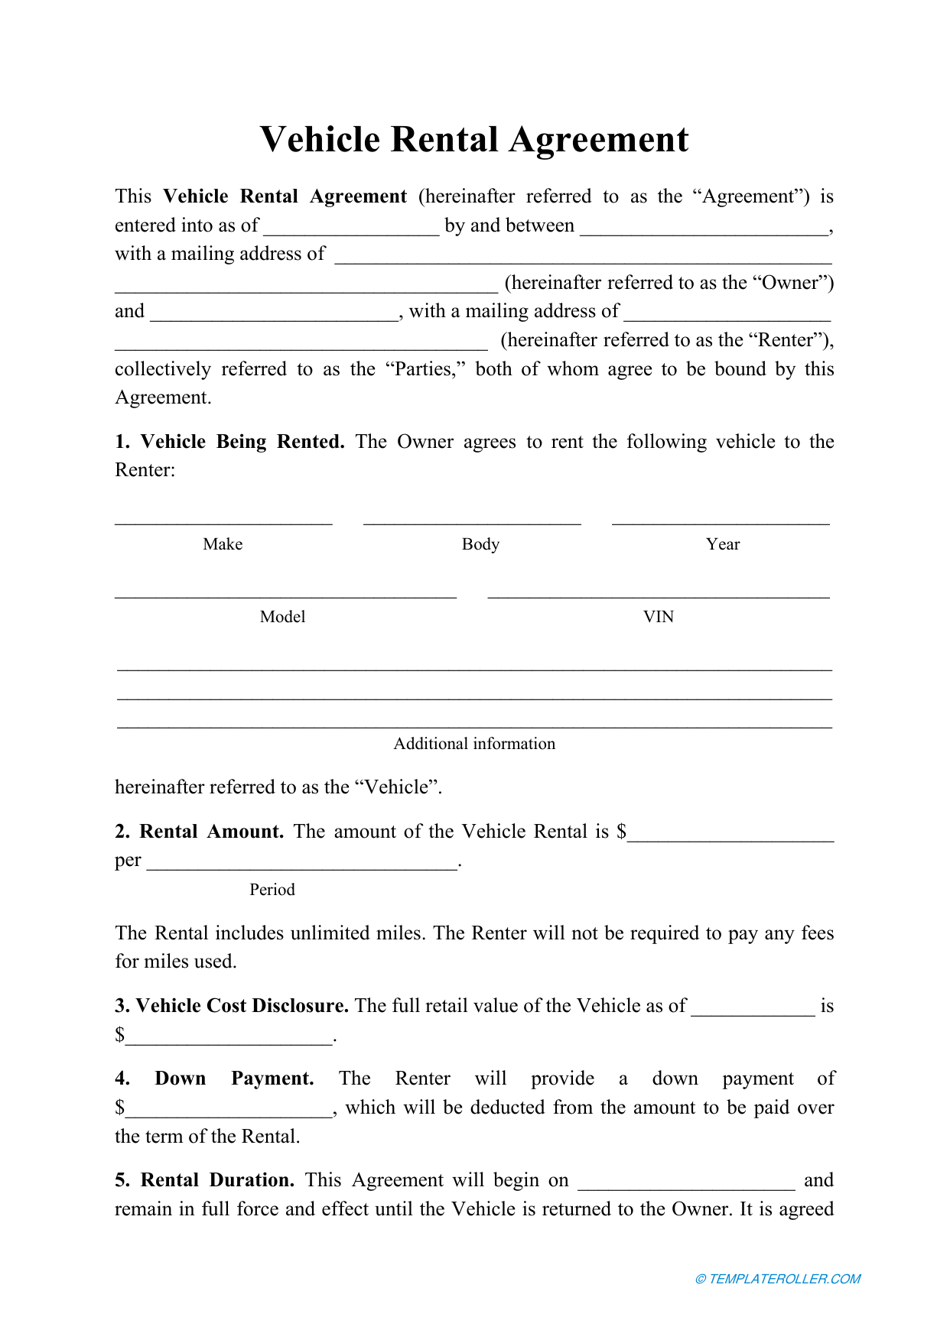 Vehicle Rental Agreement Template Download Printable PDF Intended For share purchase agreement template singapore